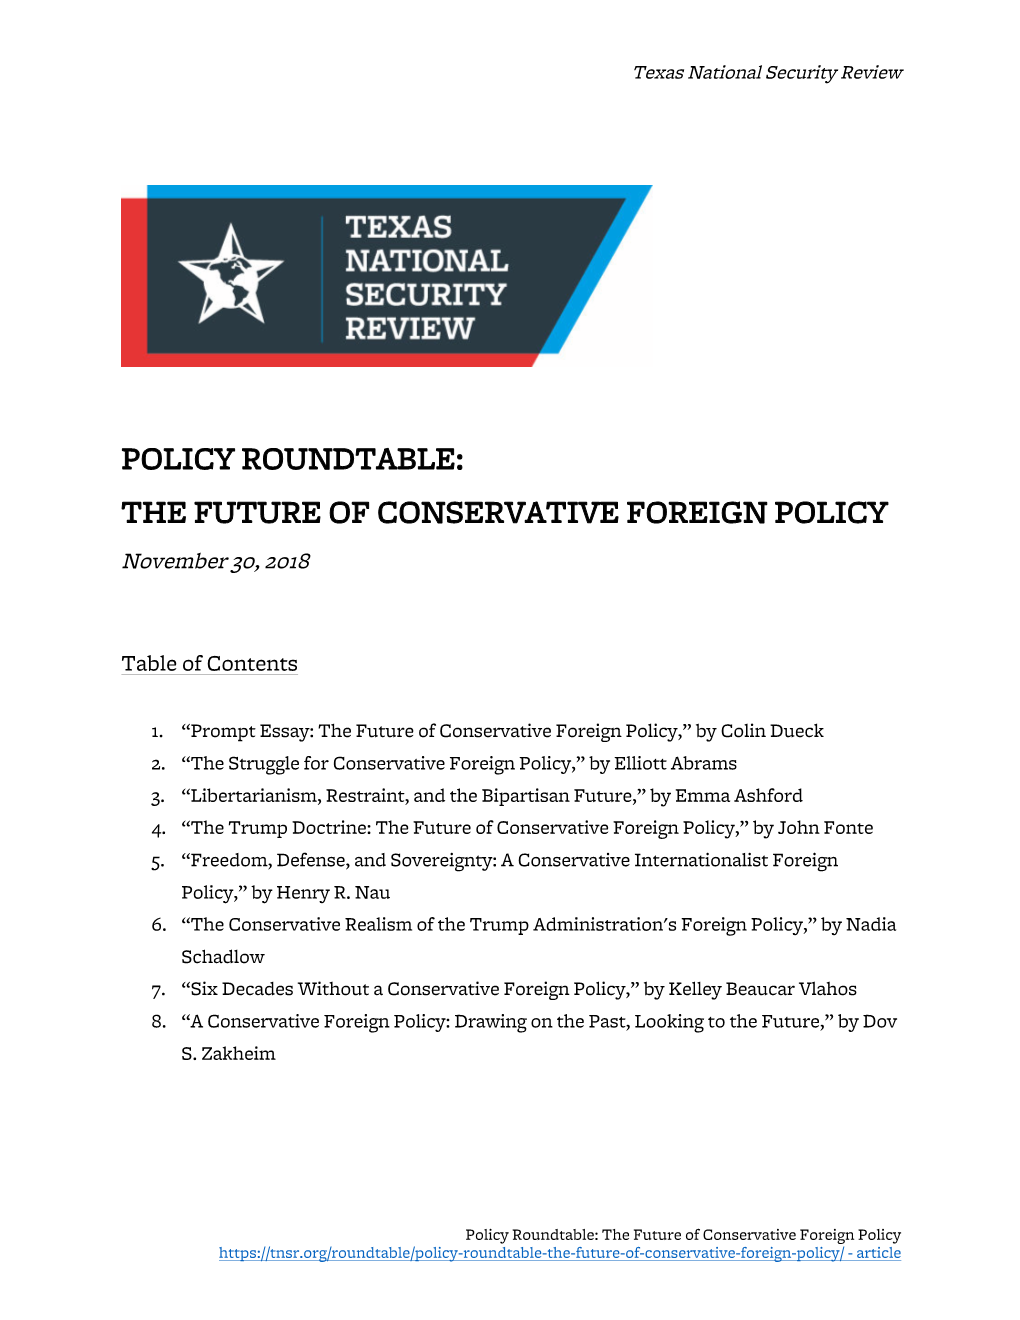 THE FUTURE of CONSERVATIVE FOREIGN POLICY November 30, 2018